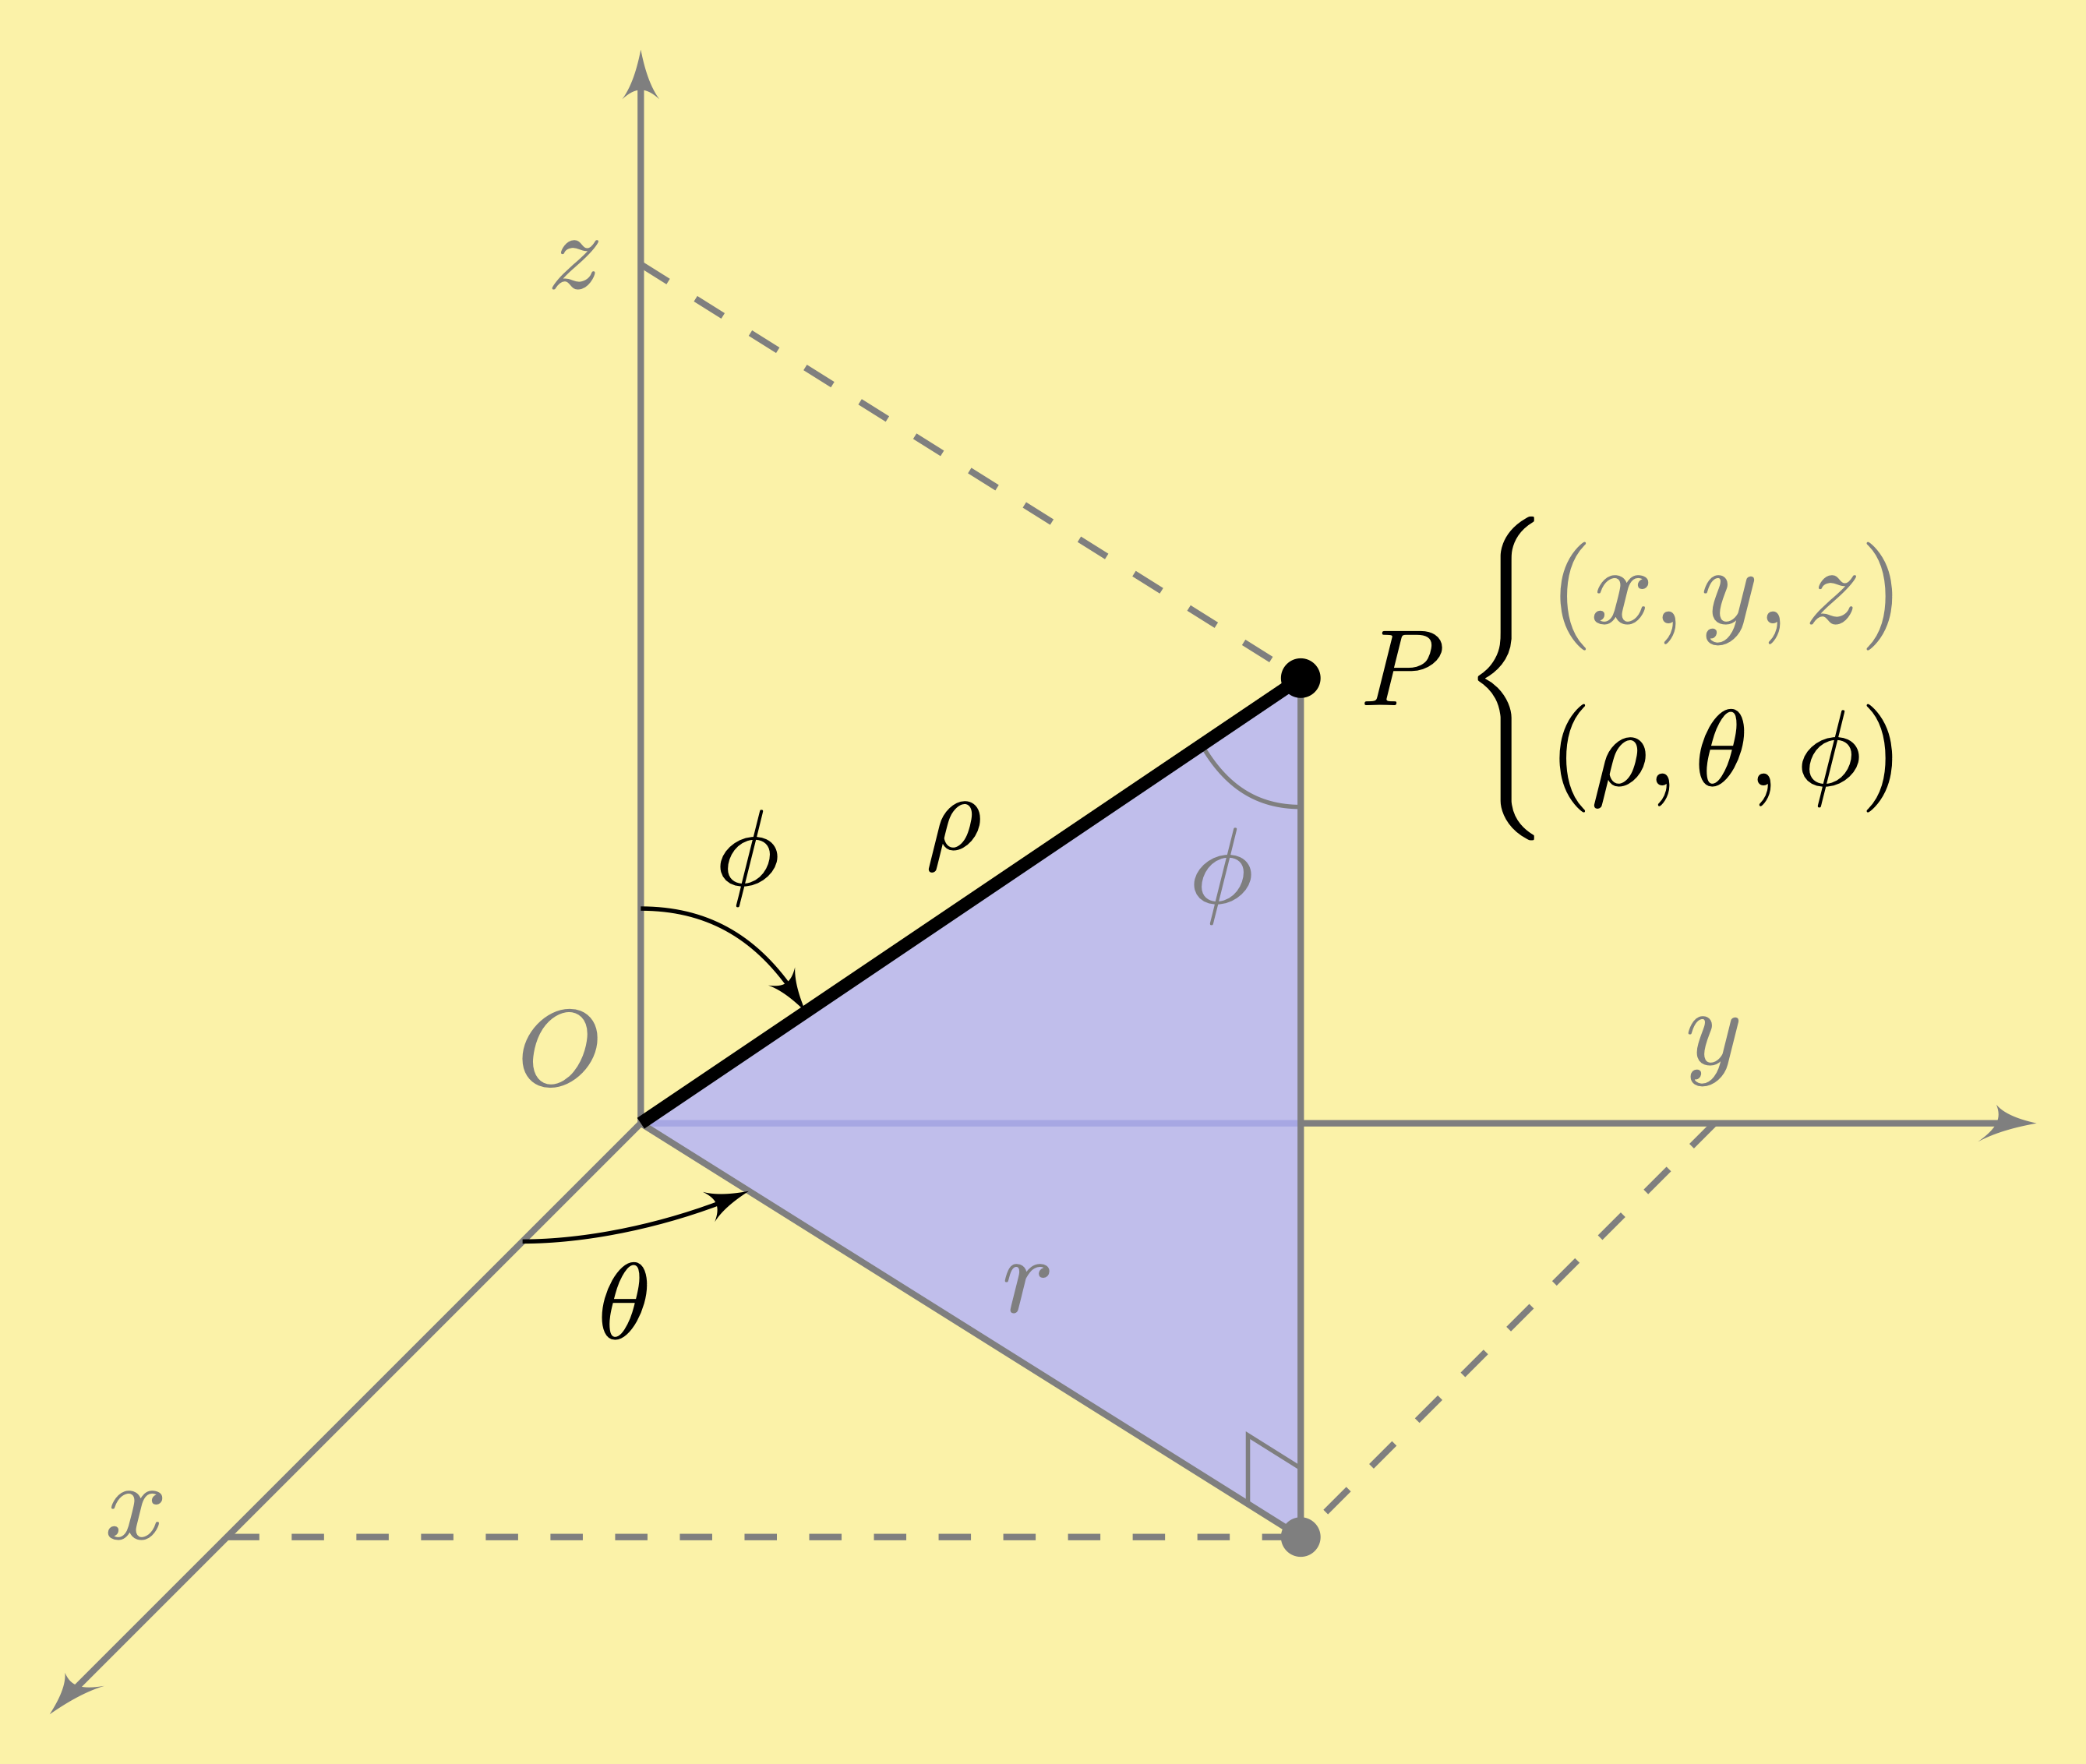 plane vector cross product 3-space coordinate system xyz R3 Cartesian three-space